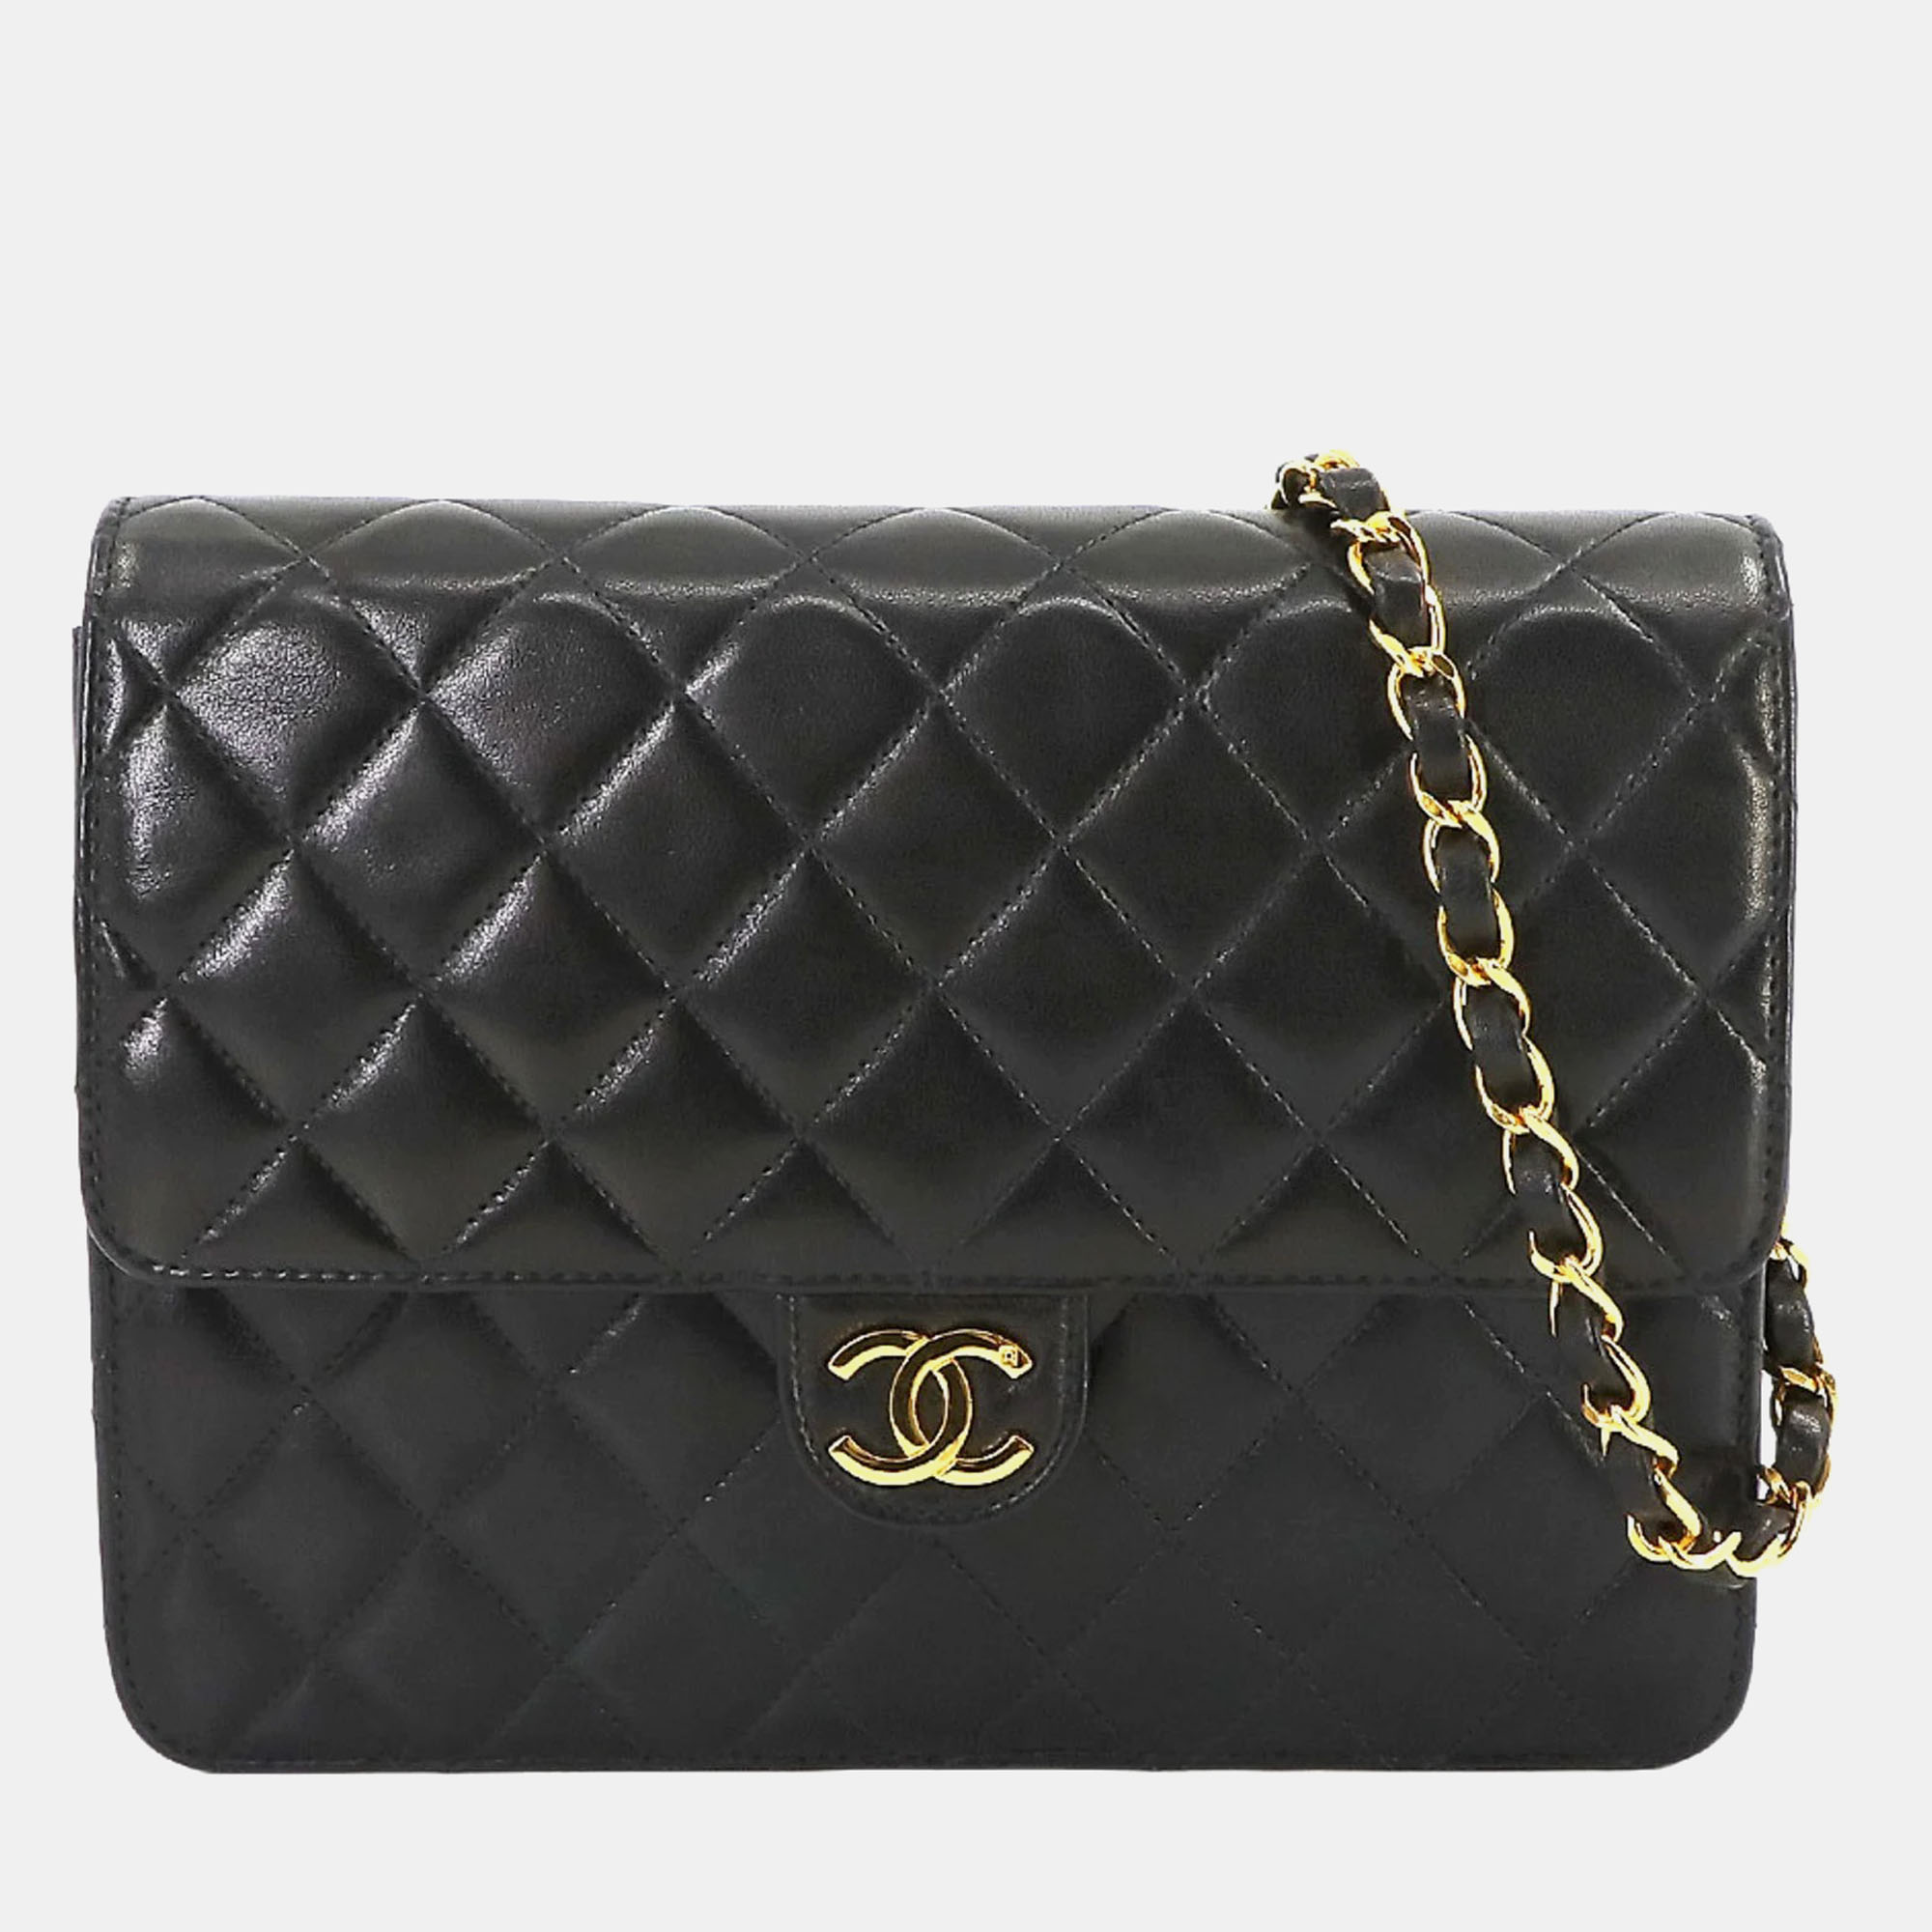 This elegant Chanel shoulder bag is perfect to enhance your everyday style. It is carefully sewn and finished to be a wonderful investment in your closet.